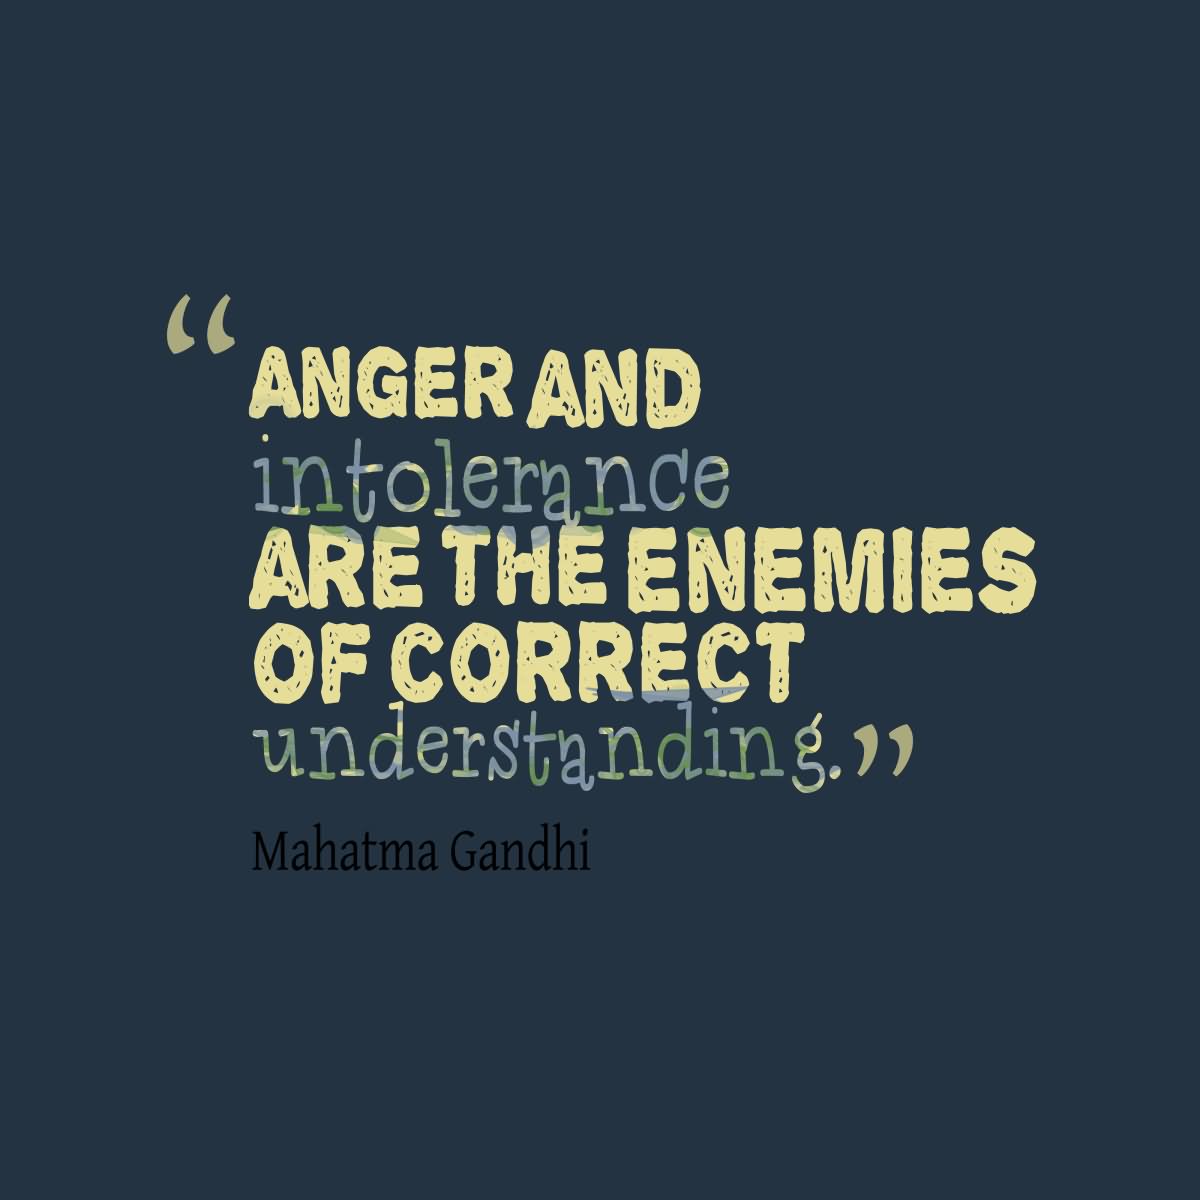 Anger and intolerance are the enemies of correct understanding. - Mahatma Gandhi